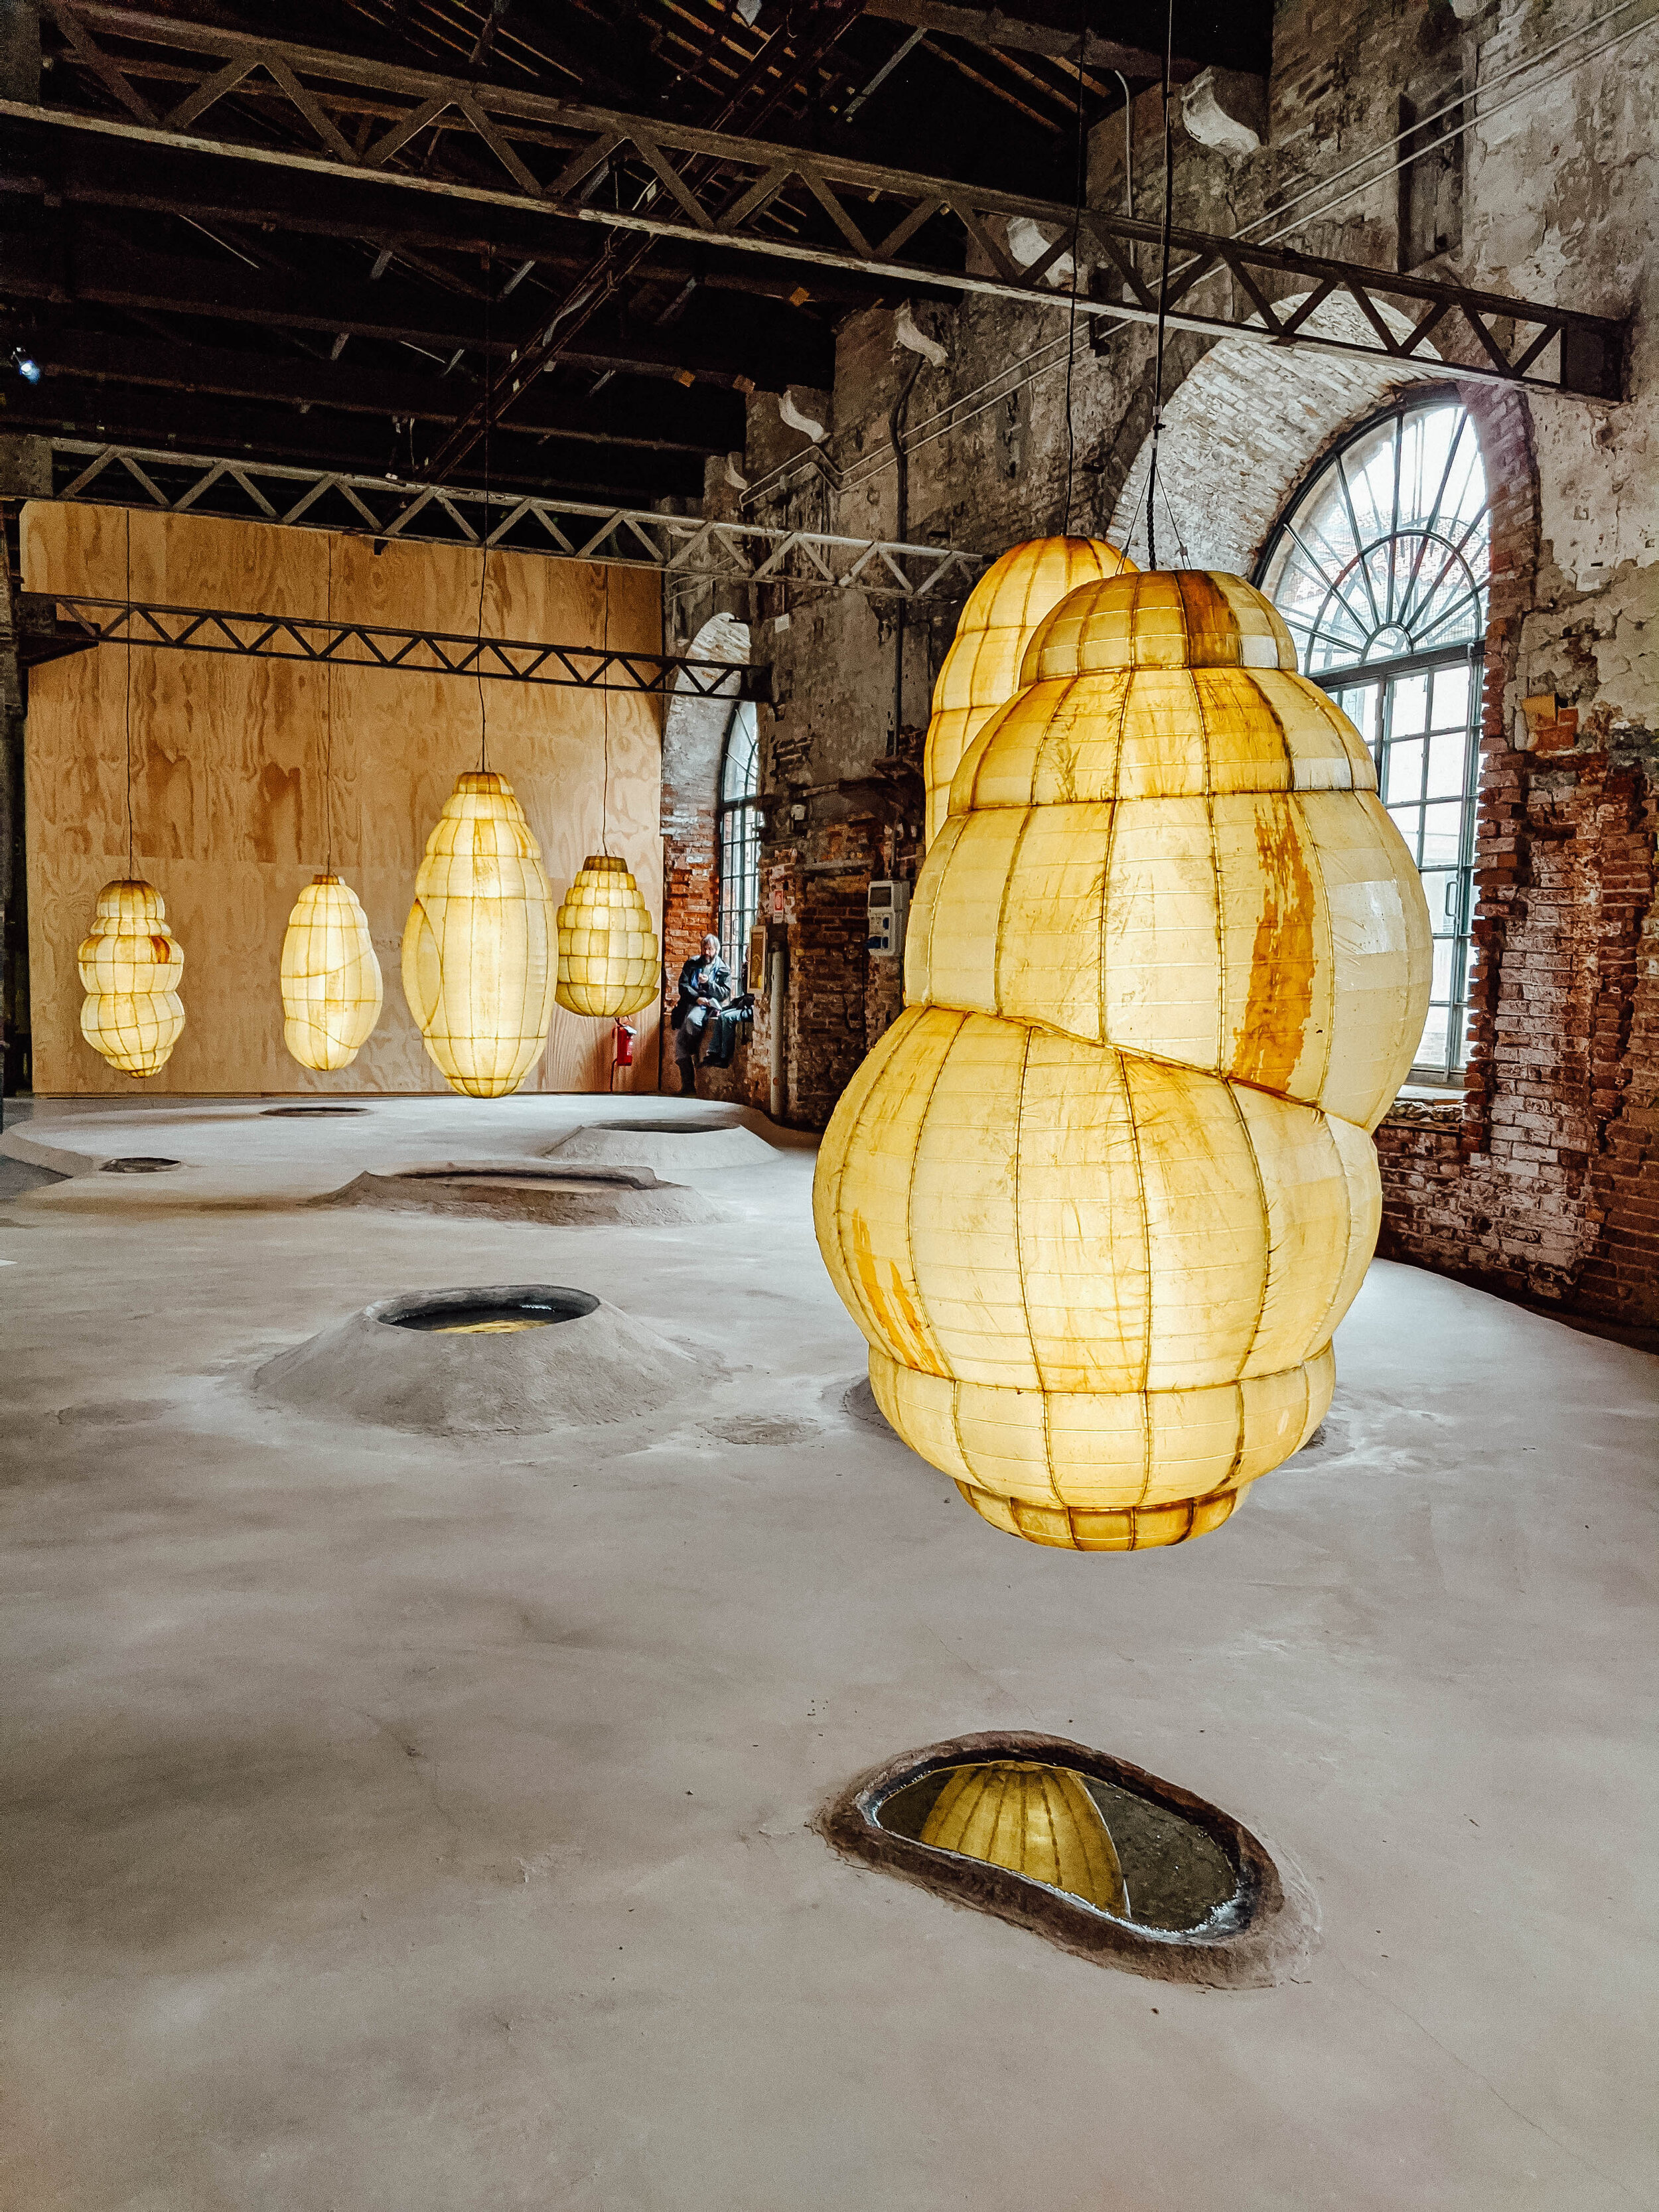 Art at Biennale 2019 in Venice Italy